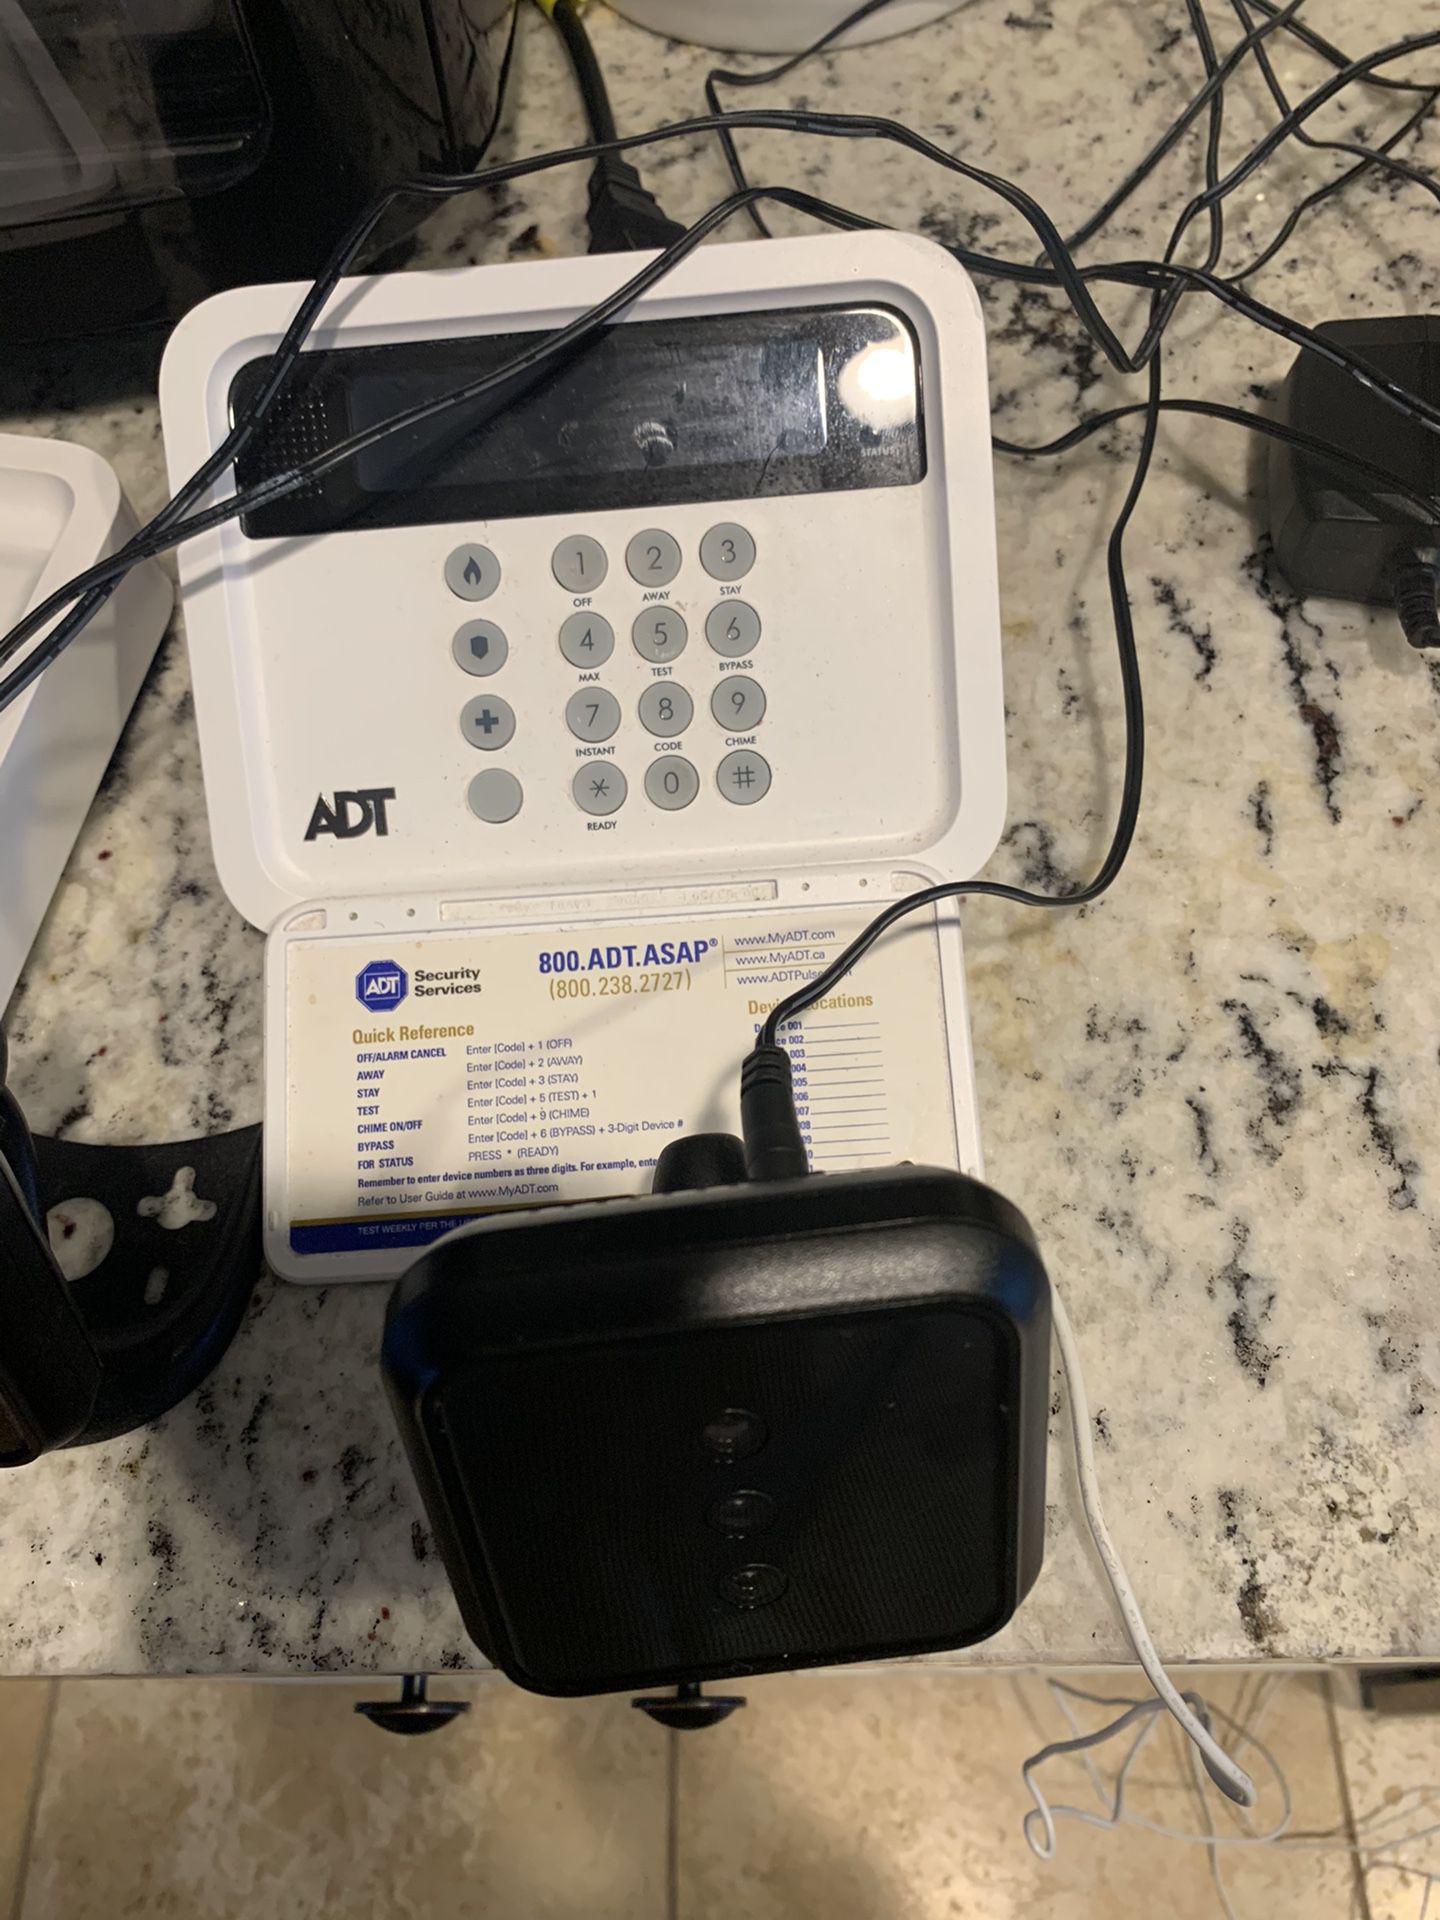 Adt security system with three cameras